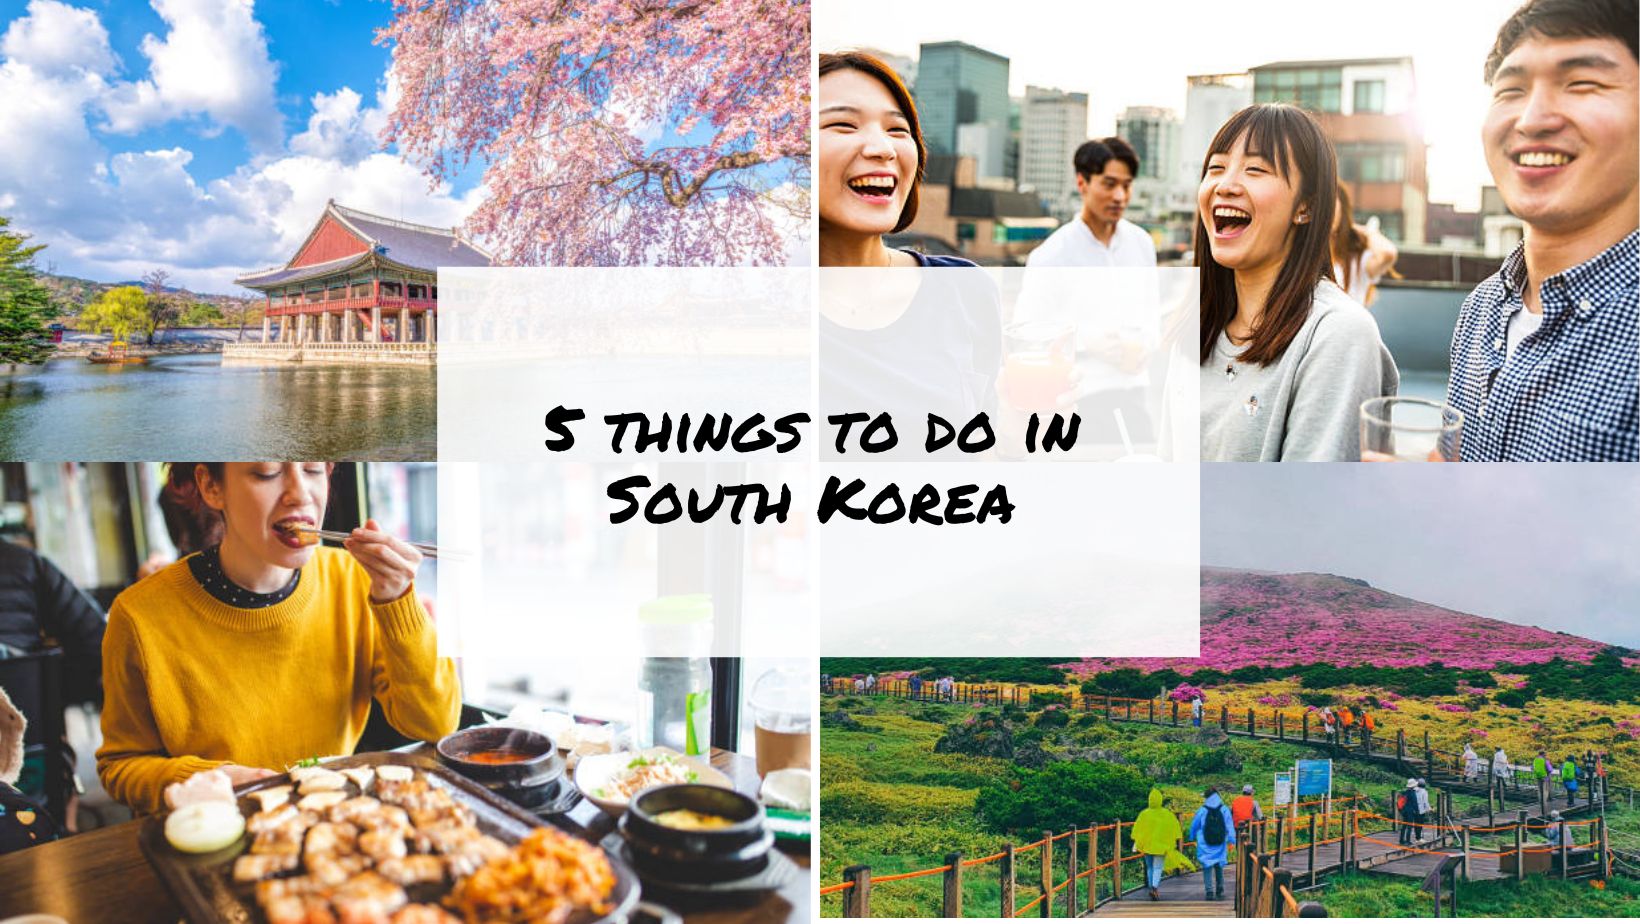 5 things to do in South Korea